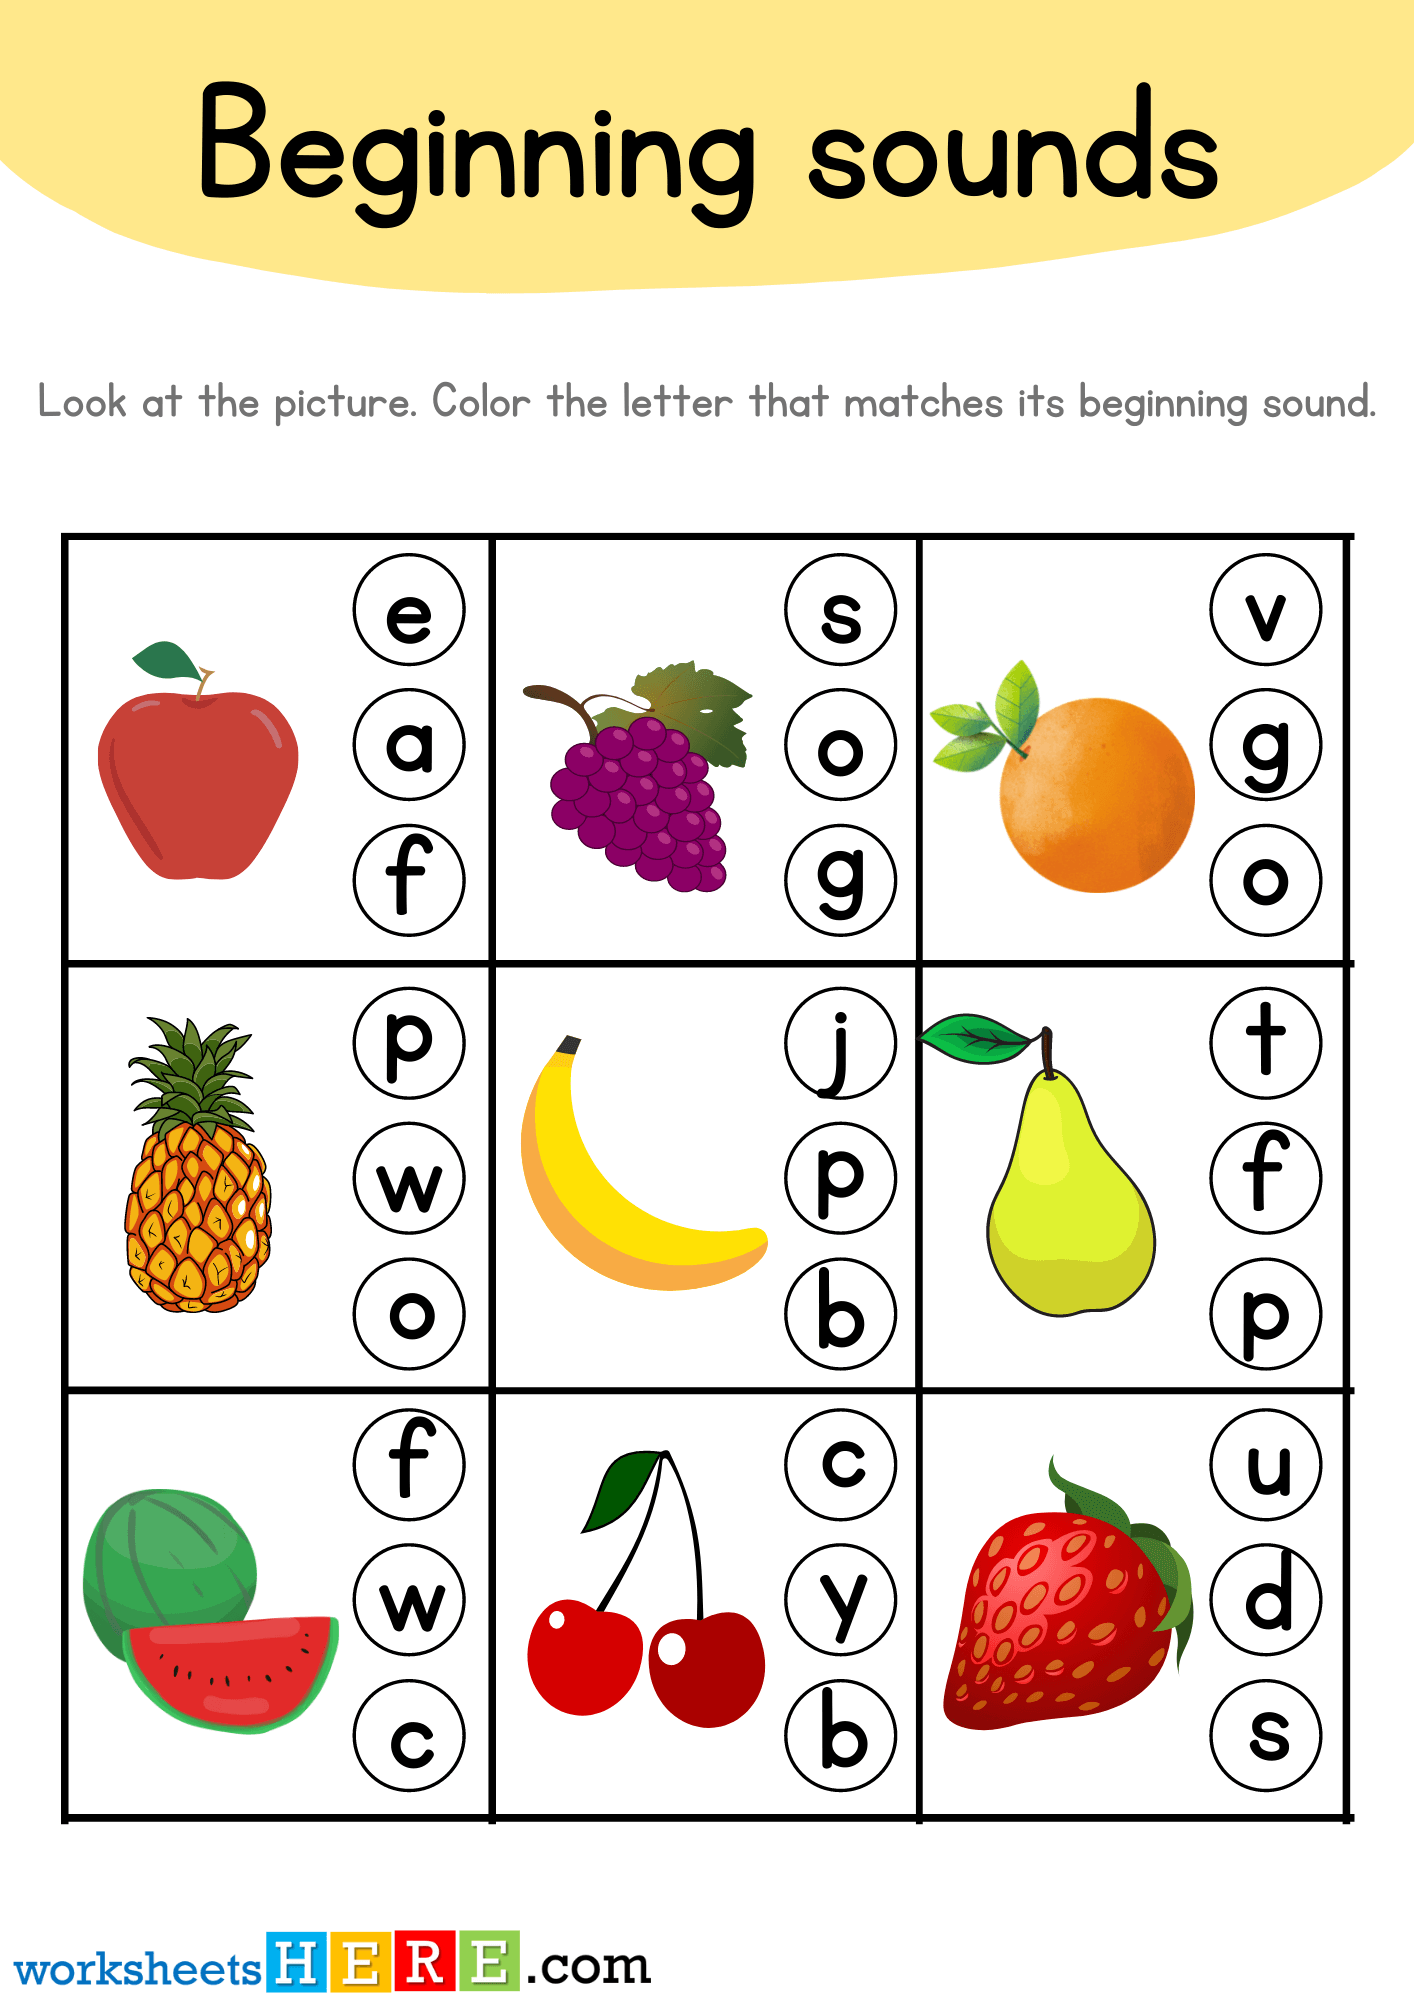 Beginning Sounds Worksheet with Fruits, Starting Sound Activity for Kids